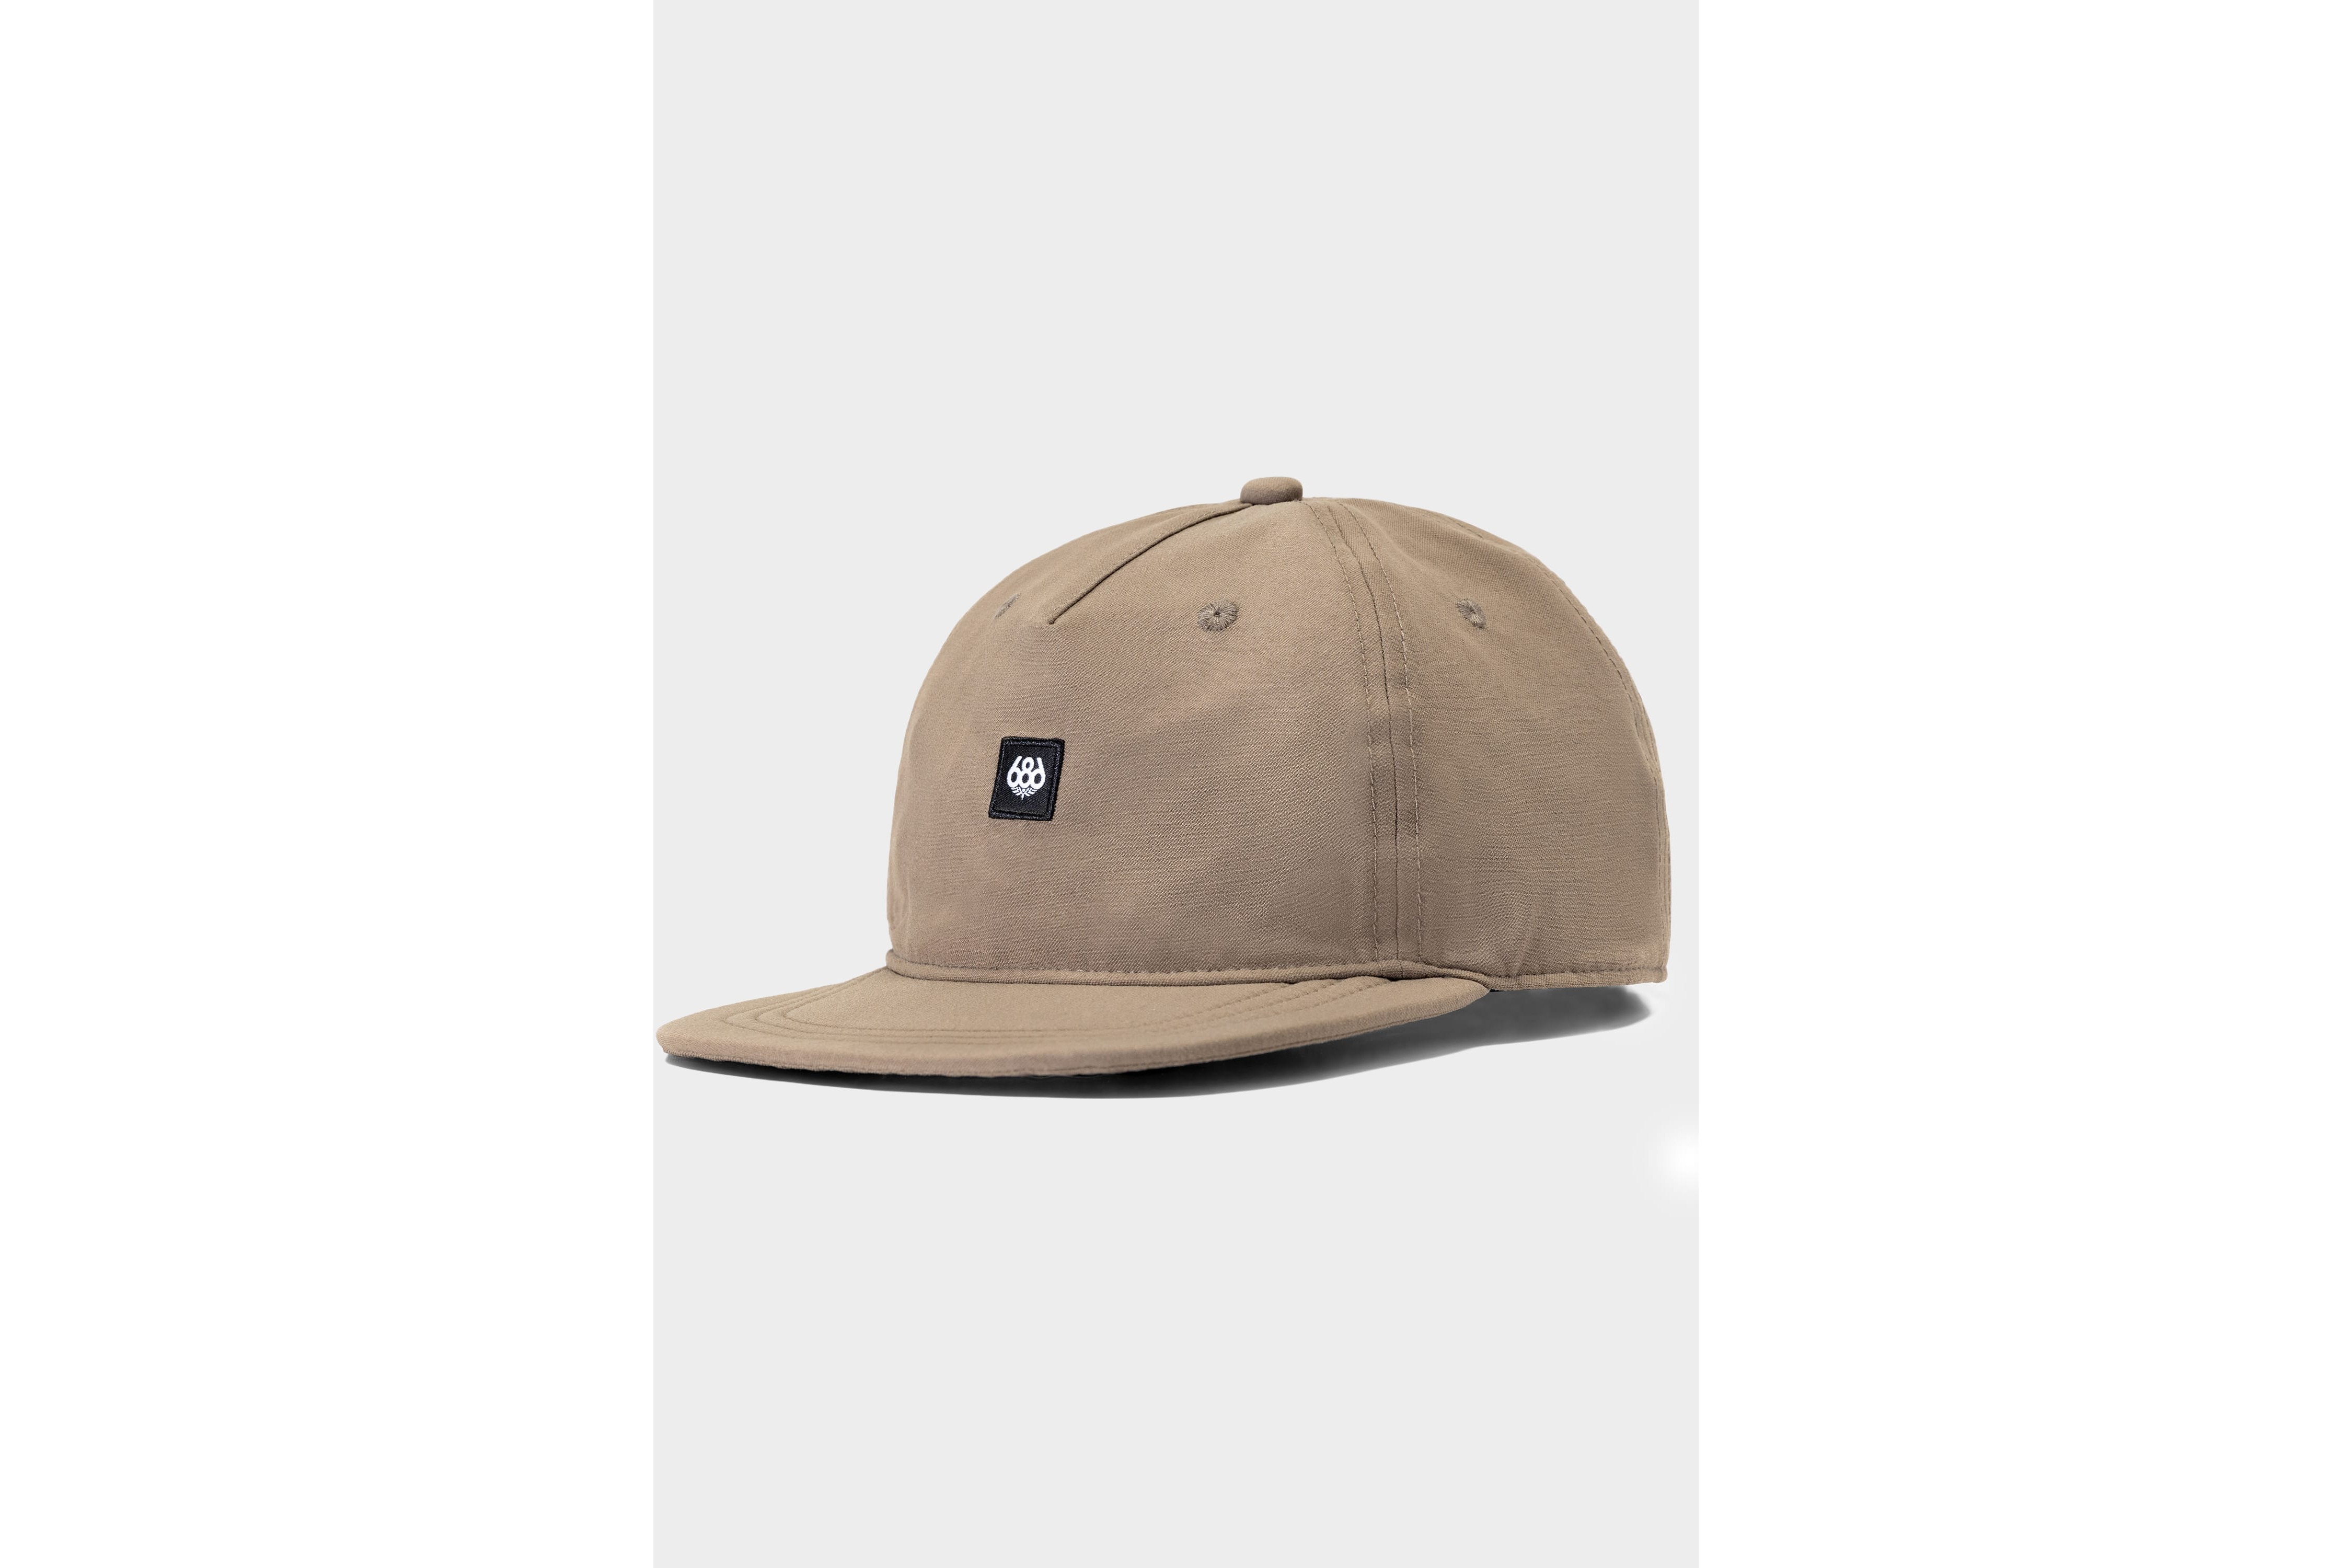 686 Packable Everywhere Hat